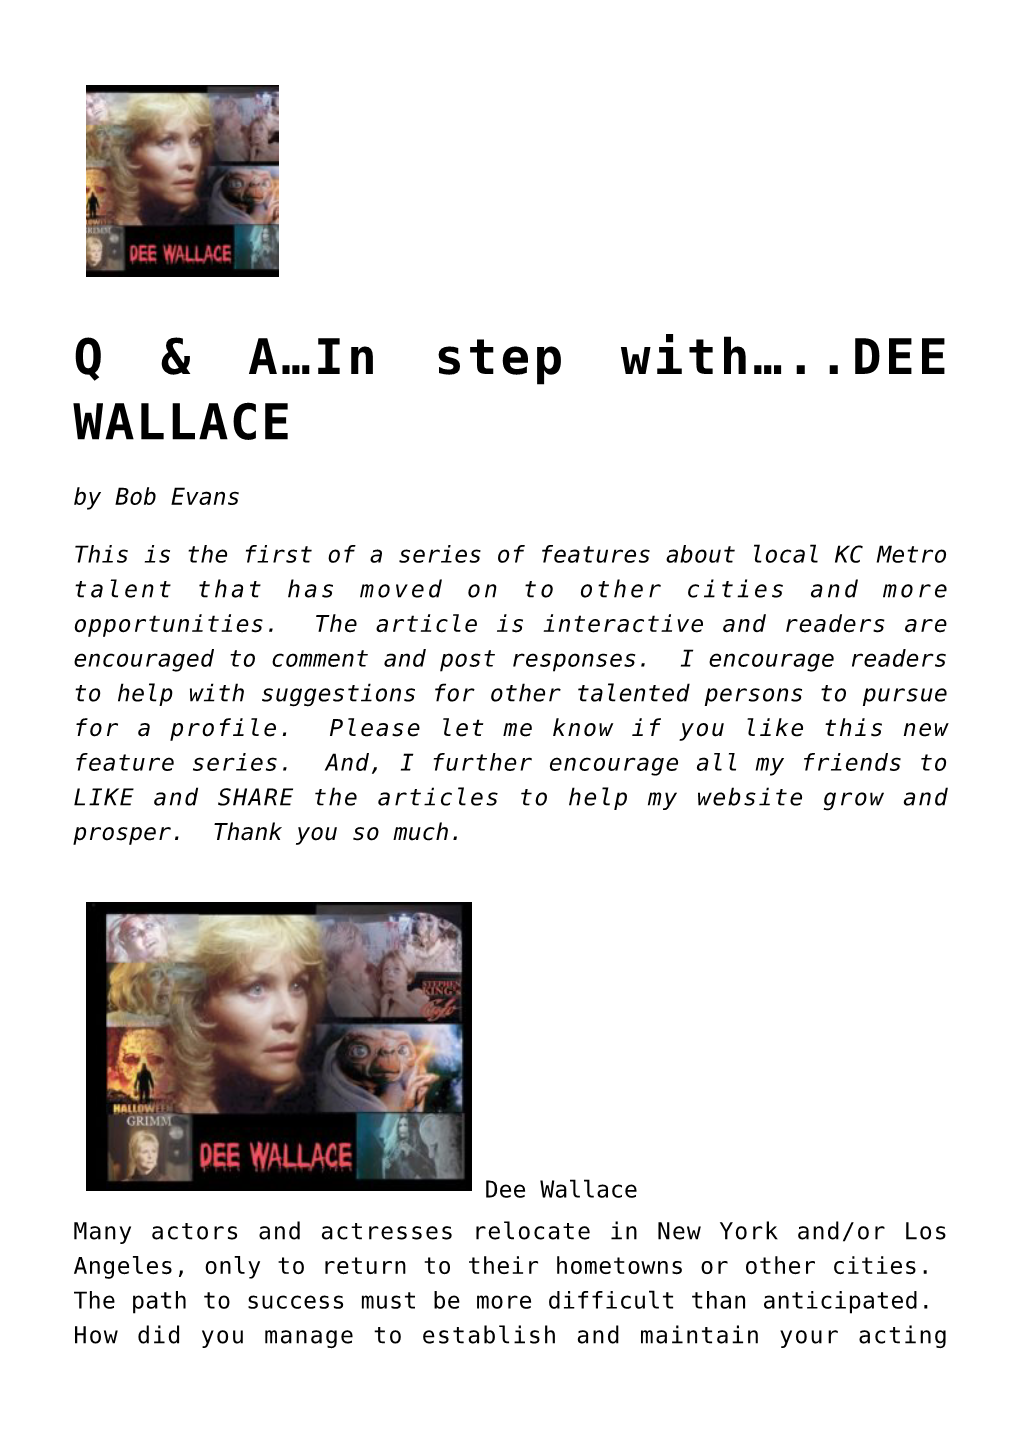 DEE WALLACE by Bob Evans